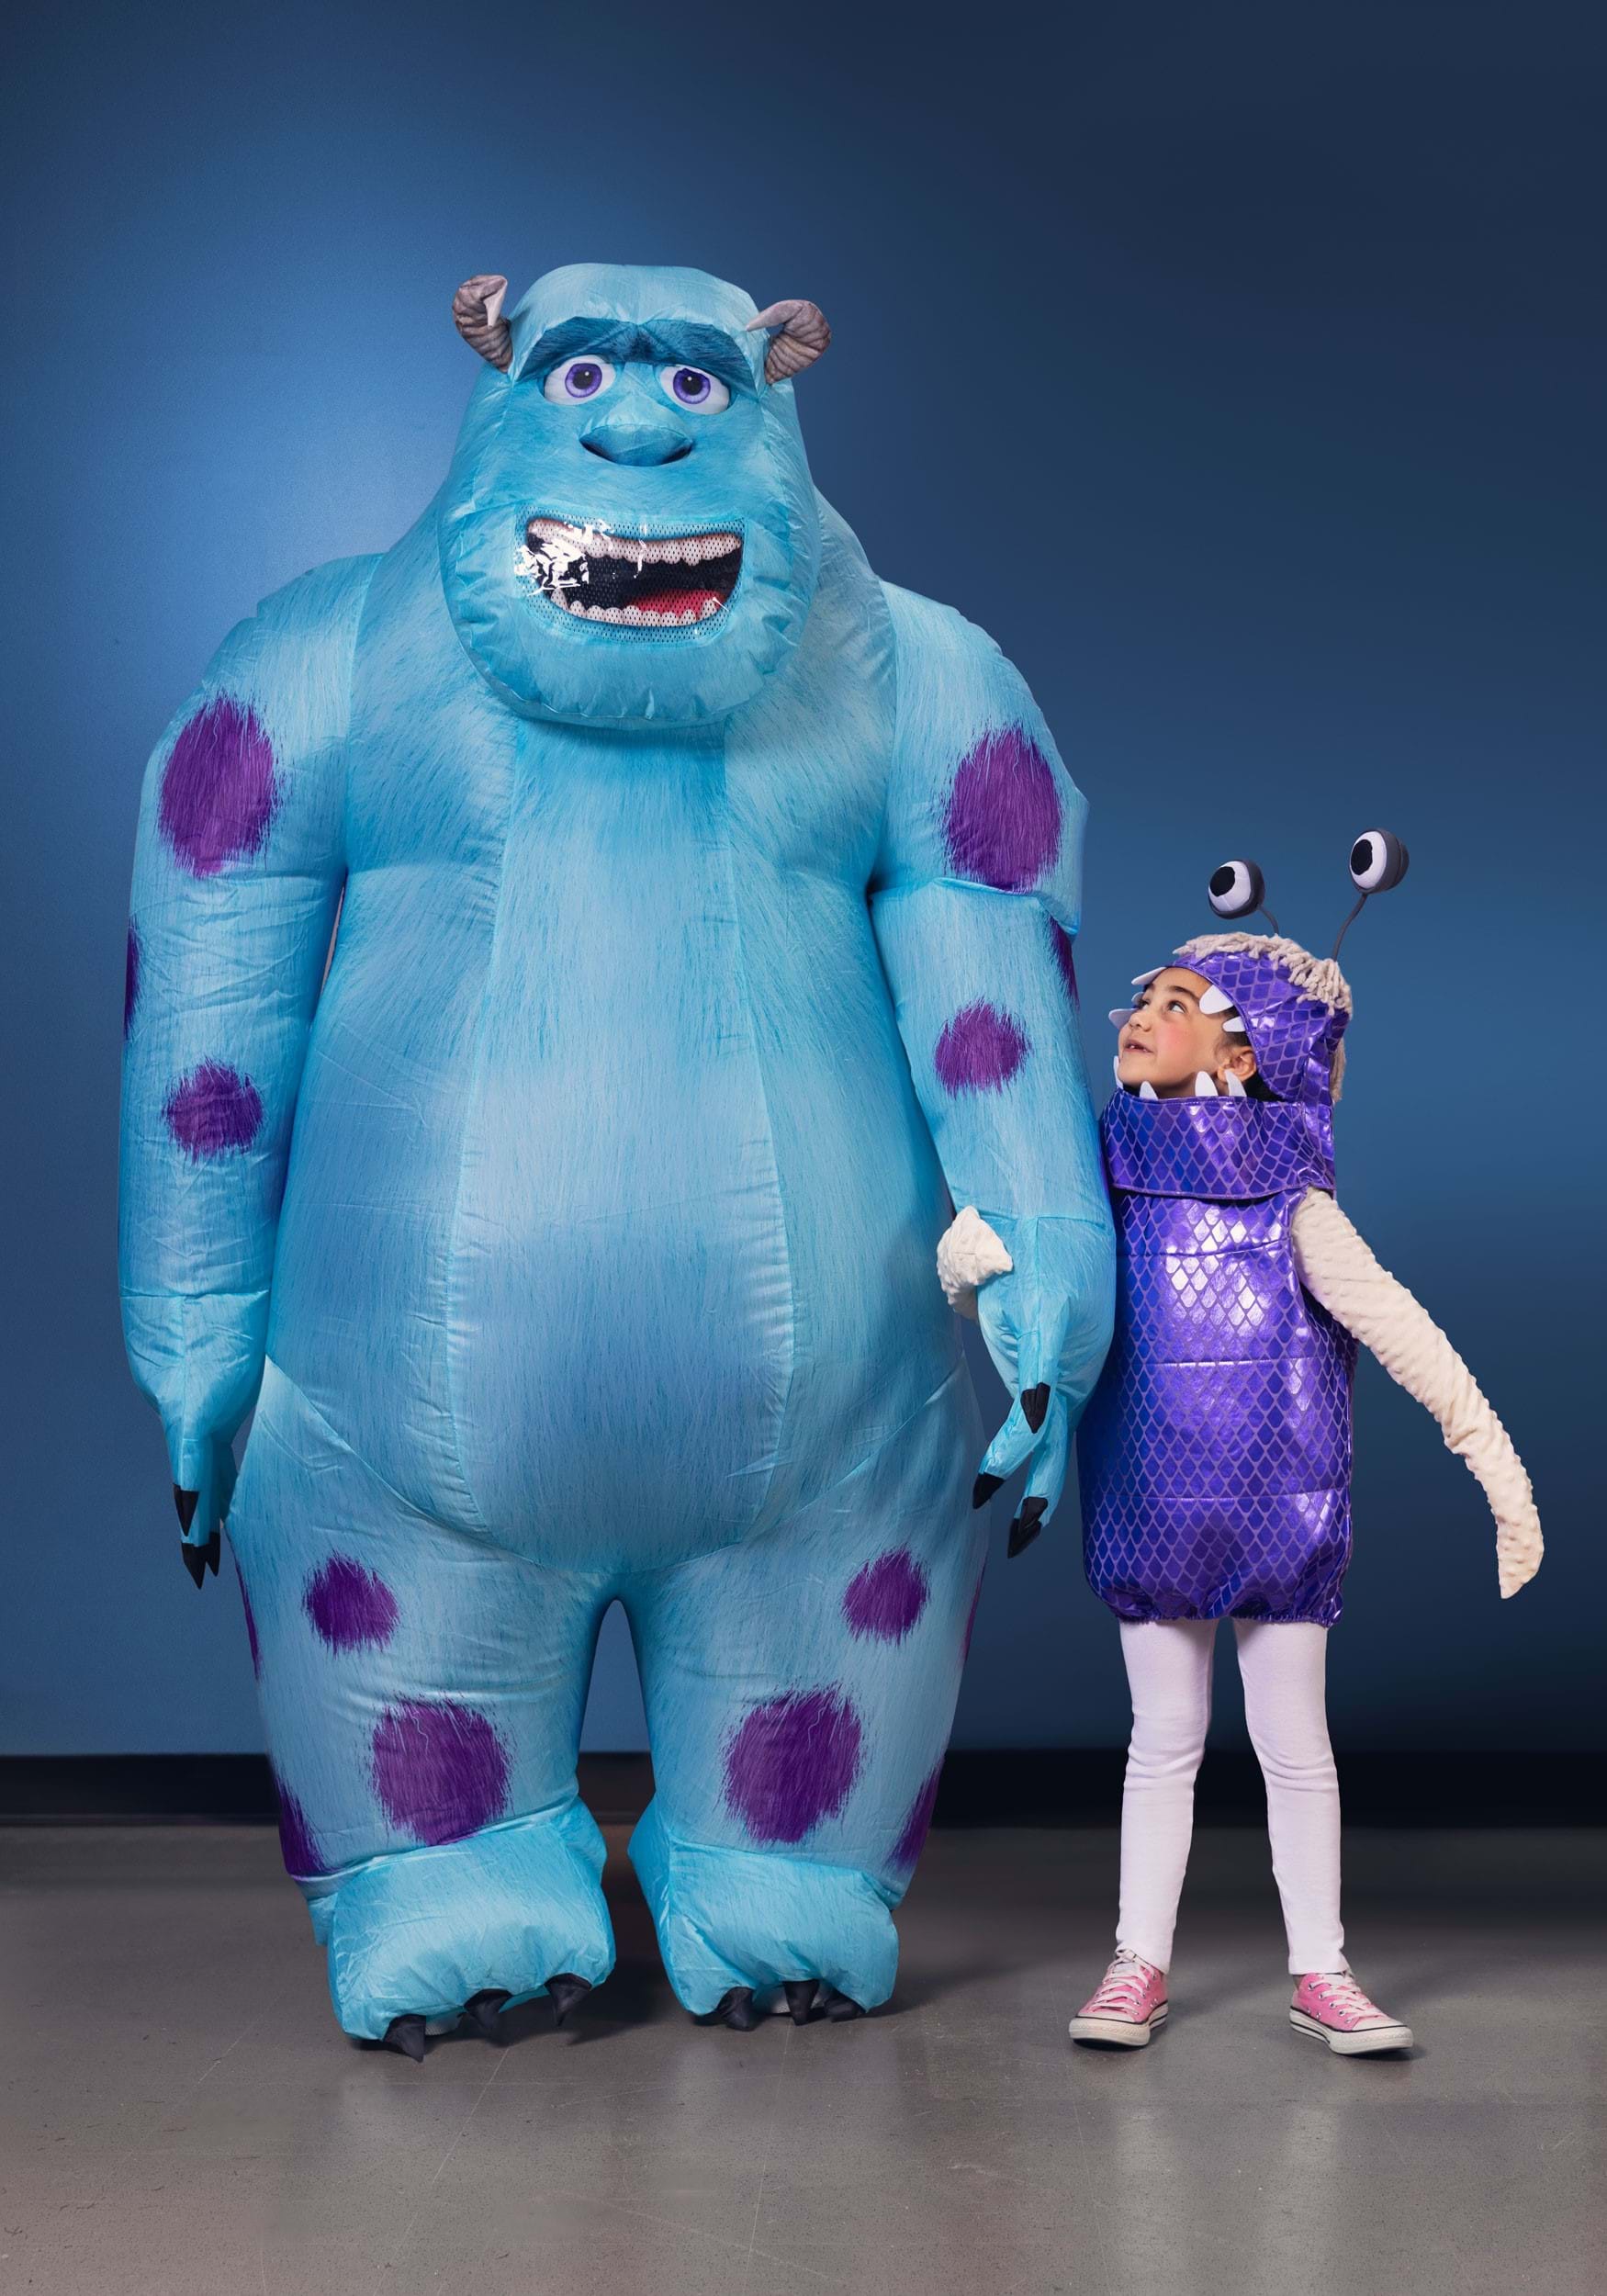 sully monsters inc costume